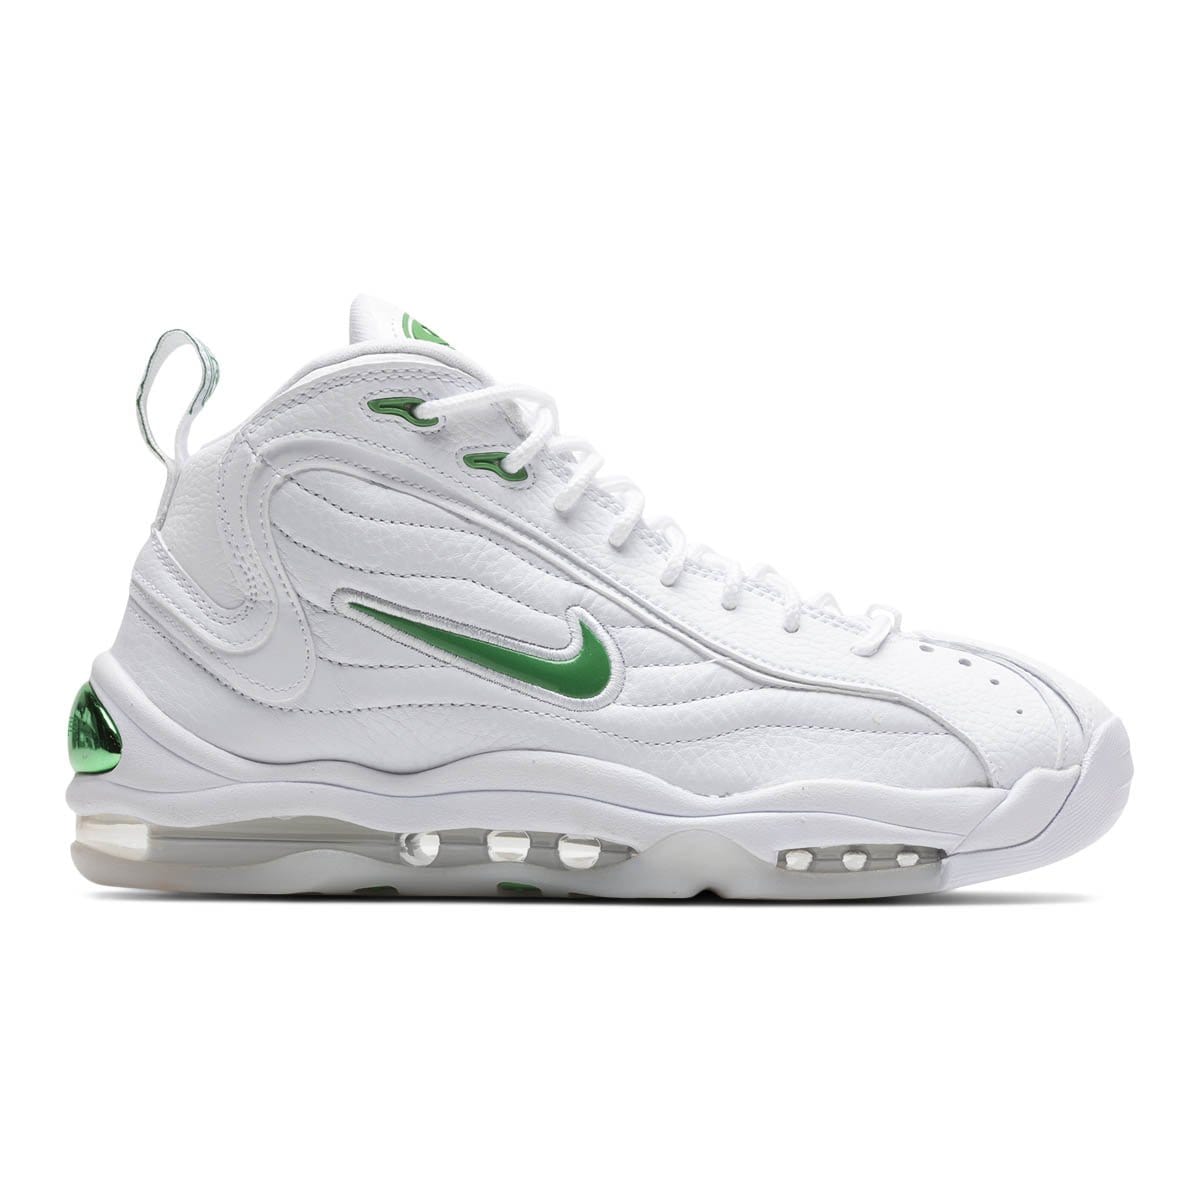 Nike Athletic AIR TOTAL MAX UPTEMPO